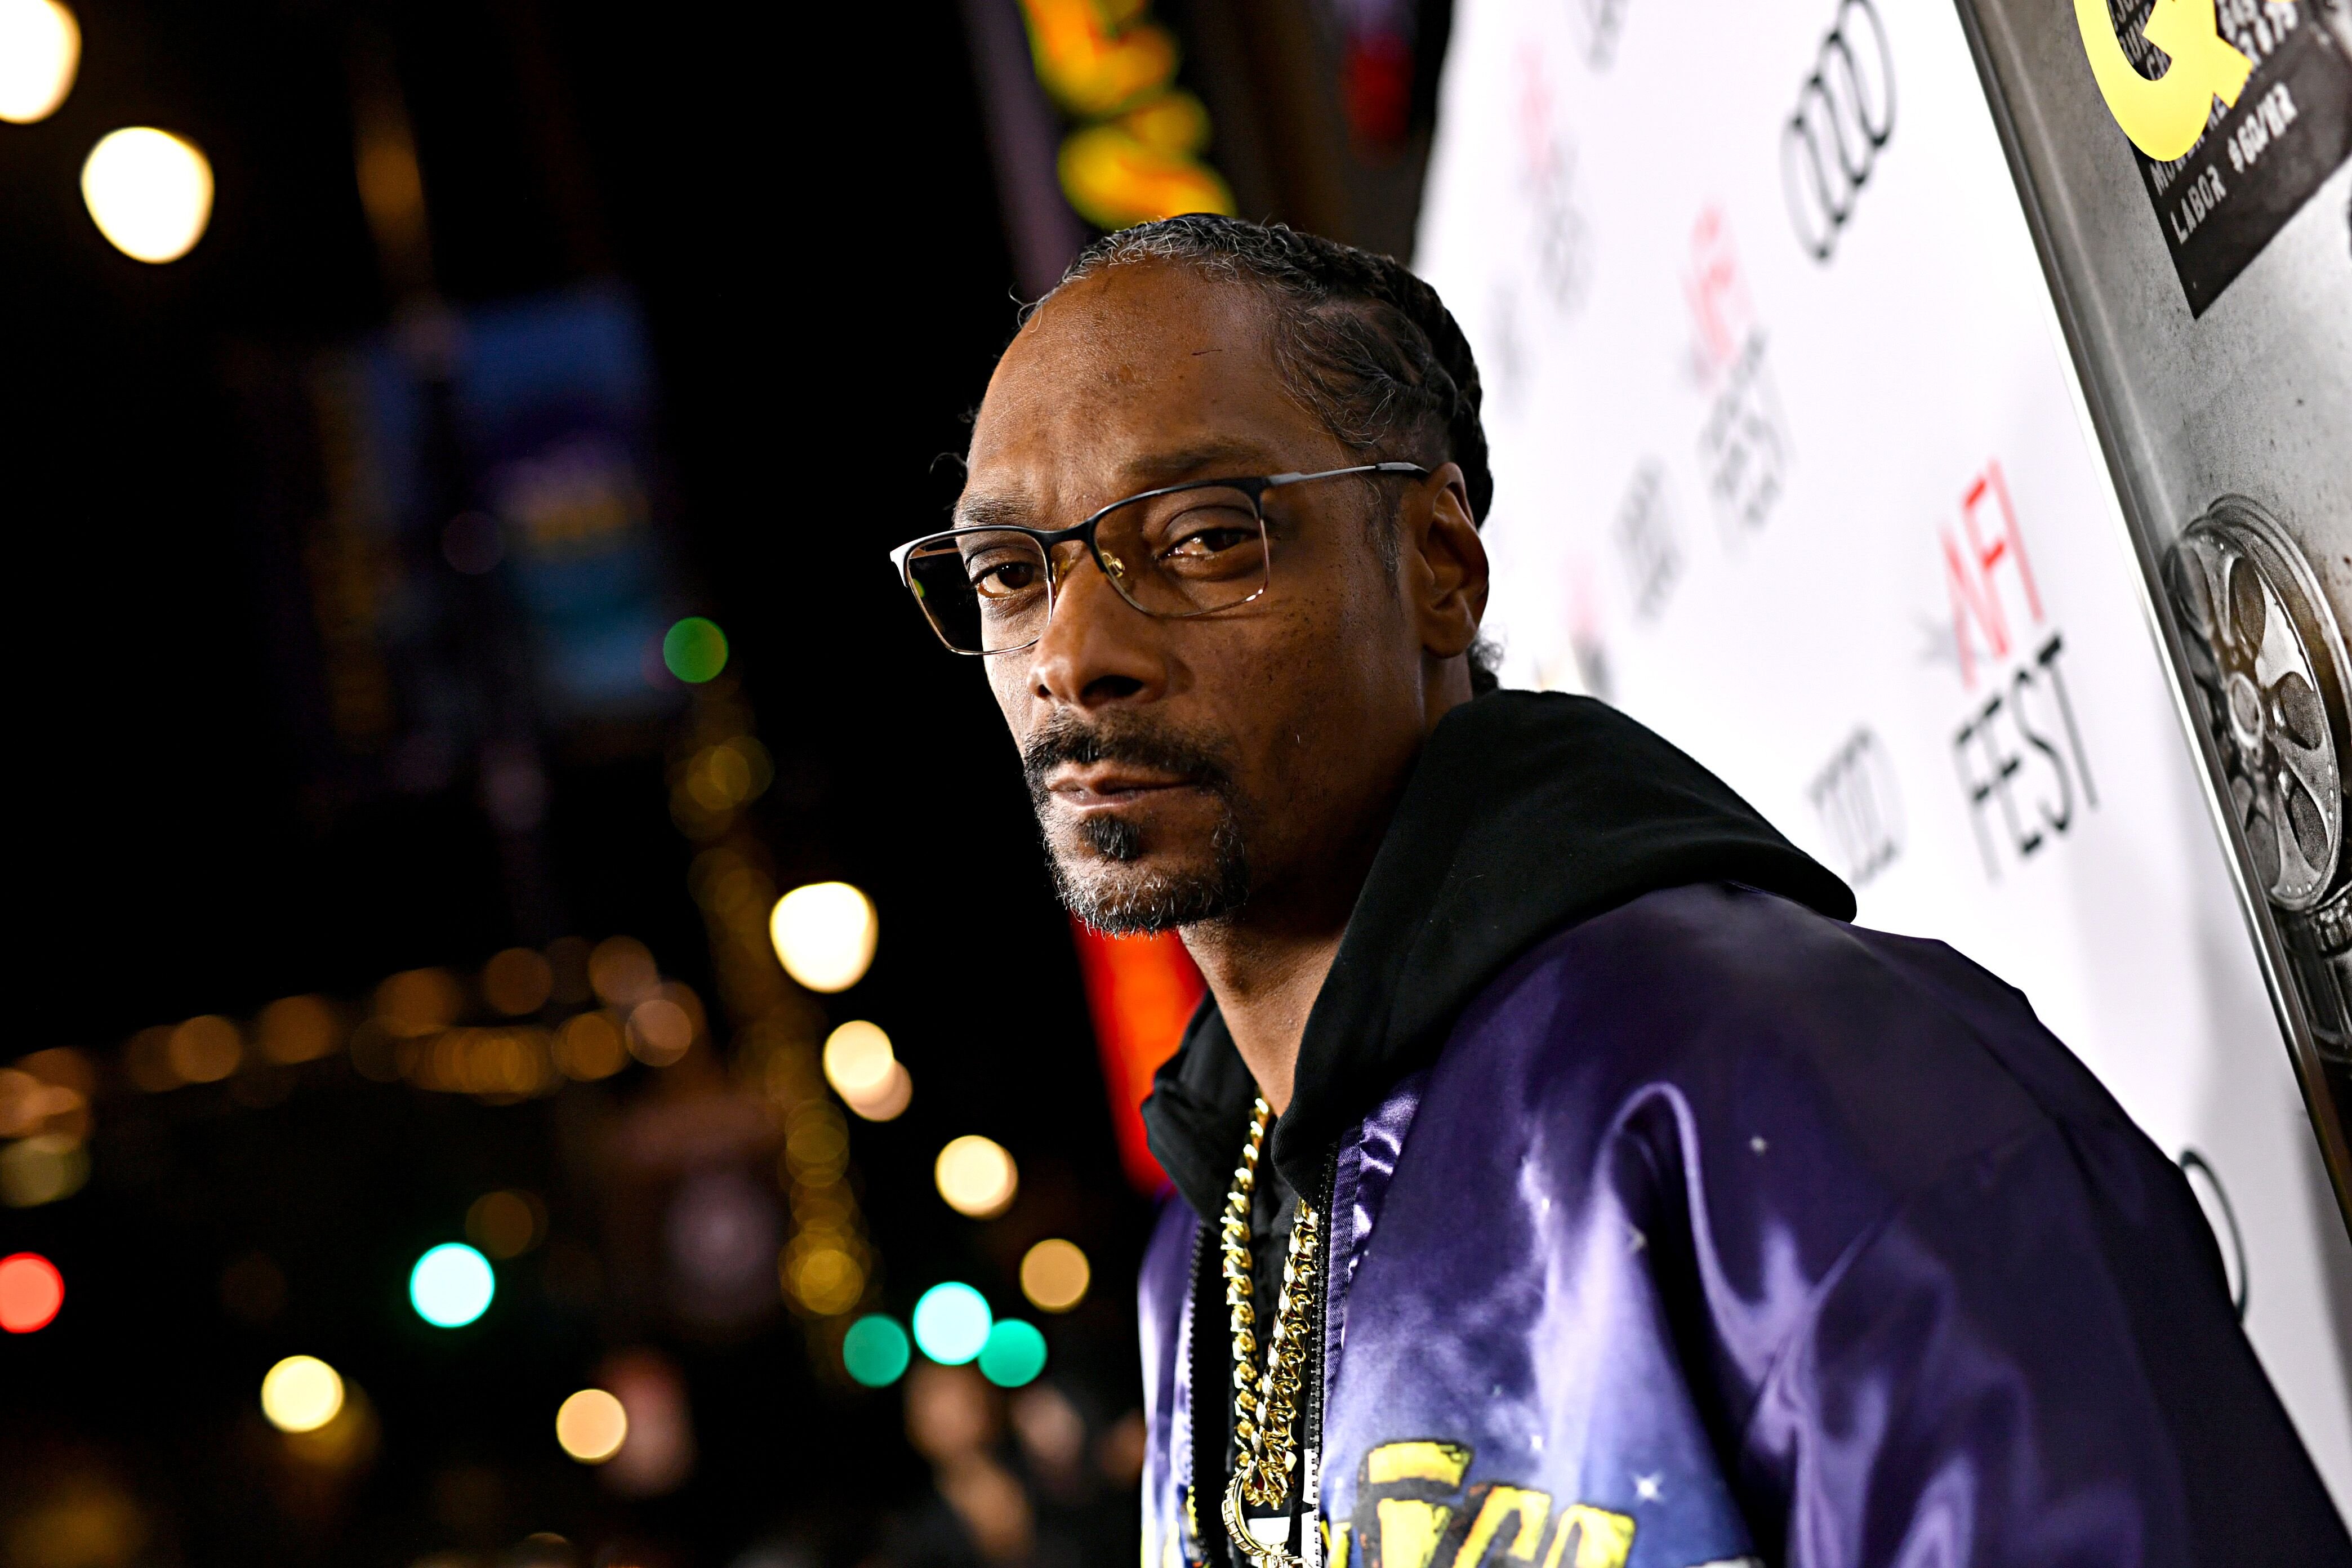 Snoop Dogg at the after party for the premiere of "Queen & Slim" at AFI FEST 2019, Hollywood/ Source: Getty Images